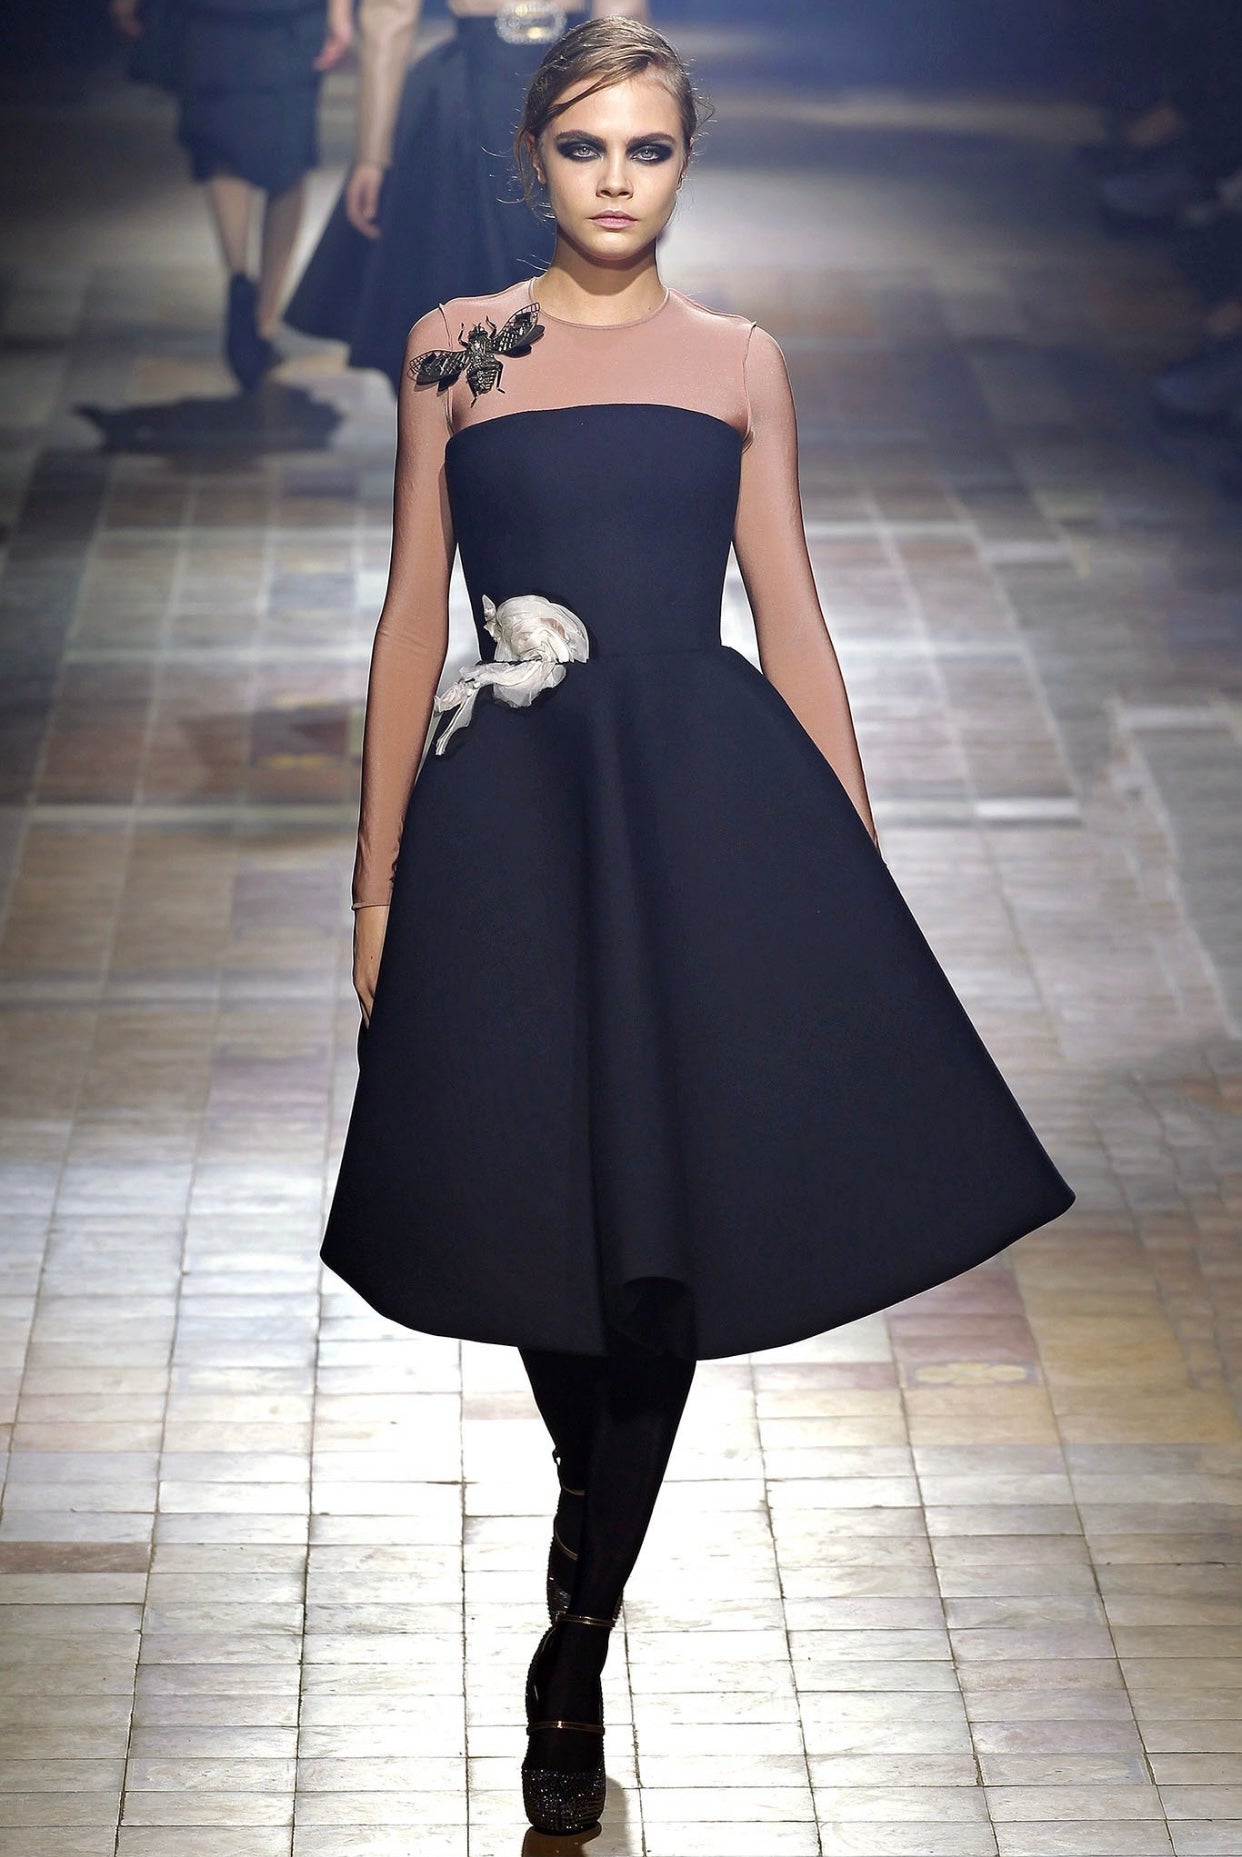 2013 F/W Strapless Floral Appliqué Dress on model Cara Delevigne on runway from Vogue archives @recessla